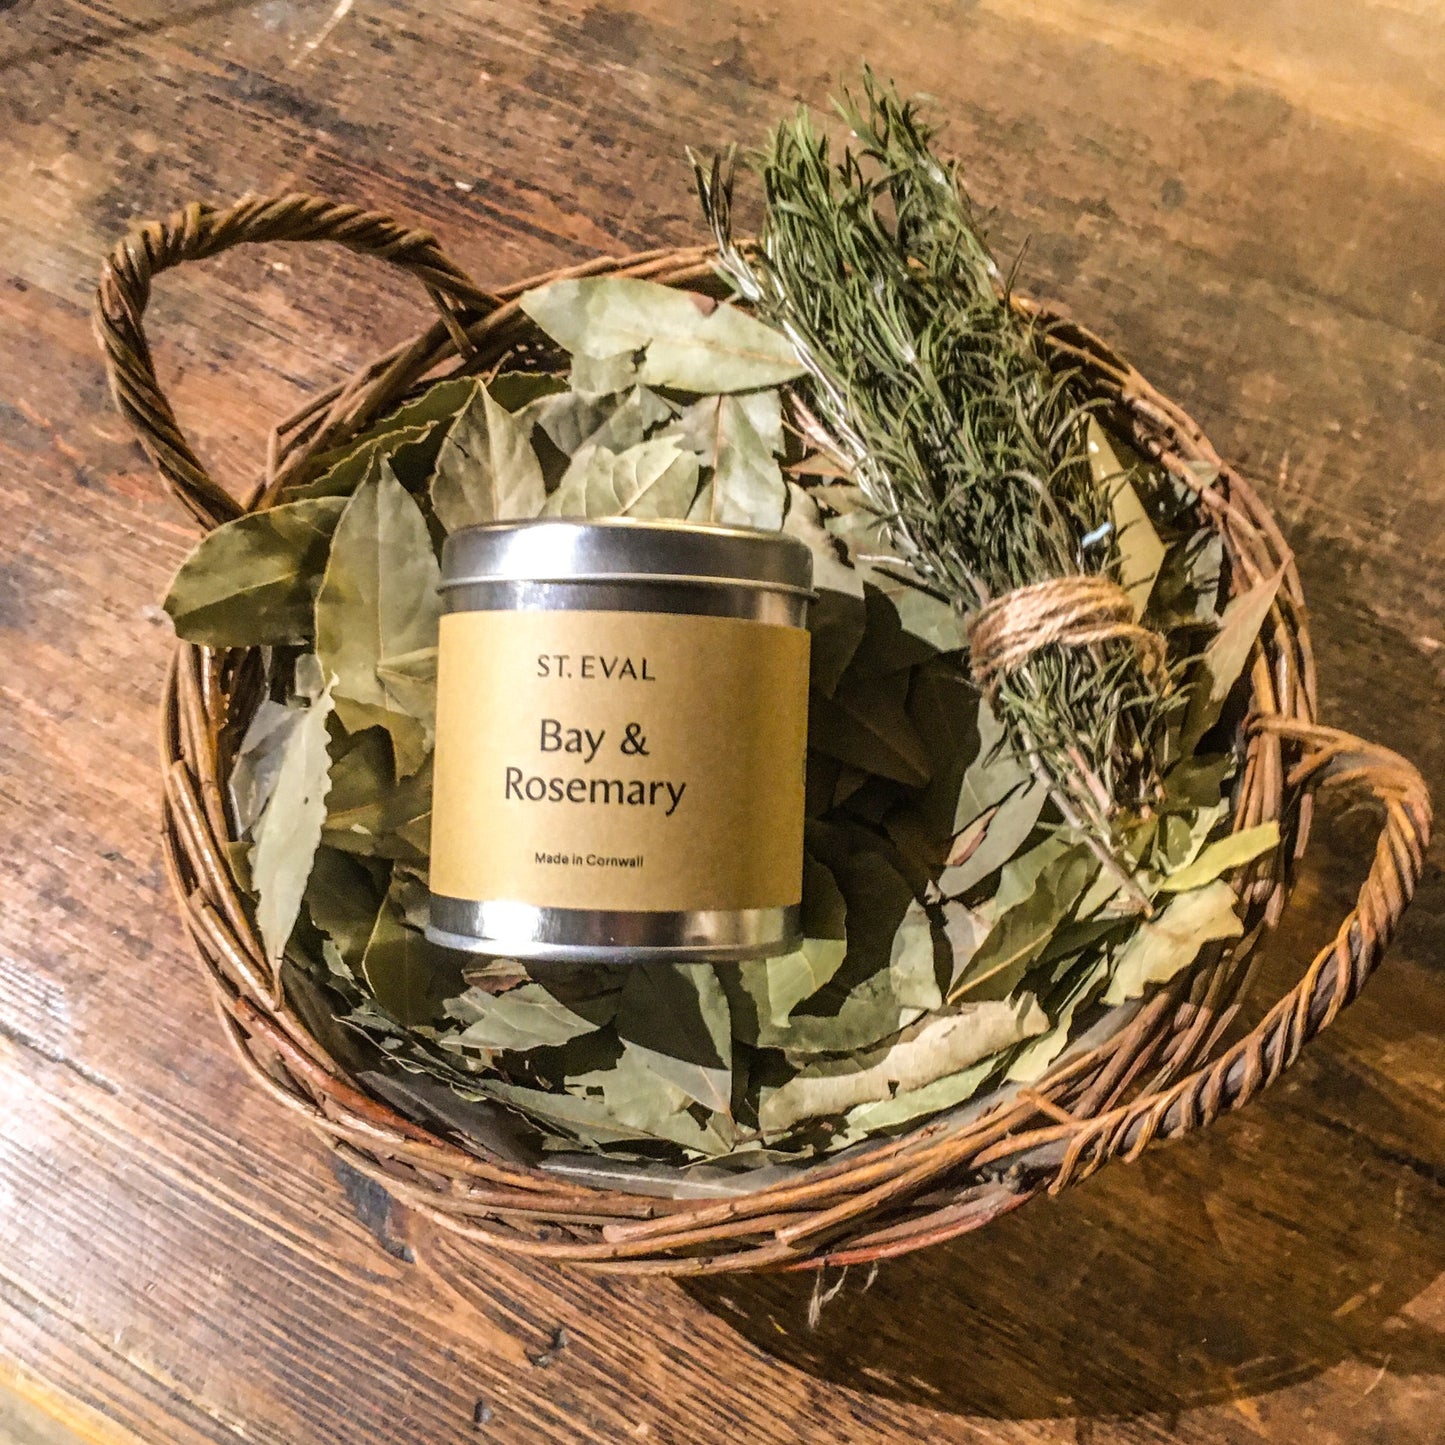 A bay and rosemary candle tin placed in a basket, on top of a pile of bay leaves and a bundle of rosemary sprigs tied with brown string